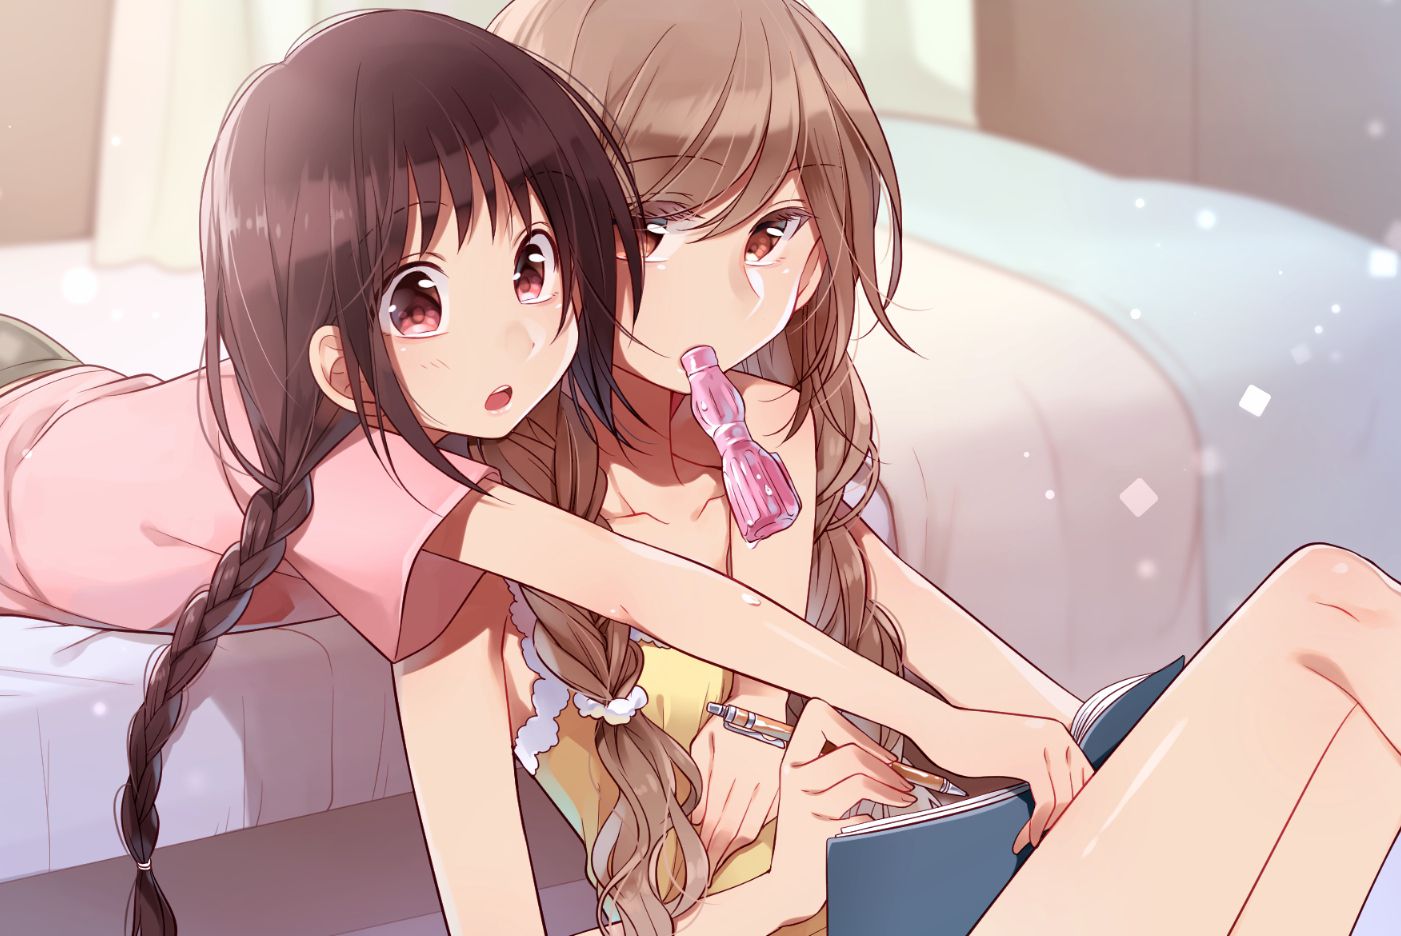 [Secondary-ZIP: Yuri lesbian image, or see other girls doing naughty things. 1